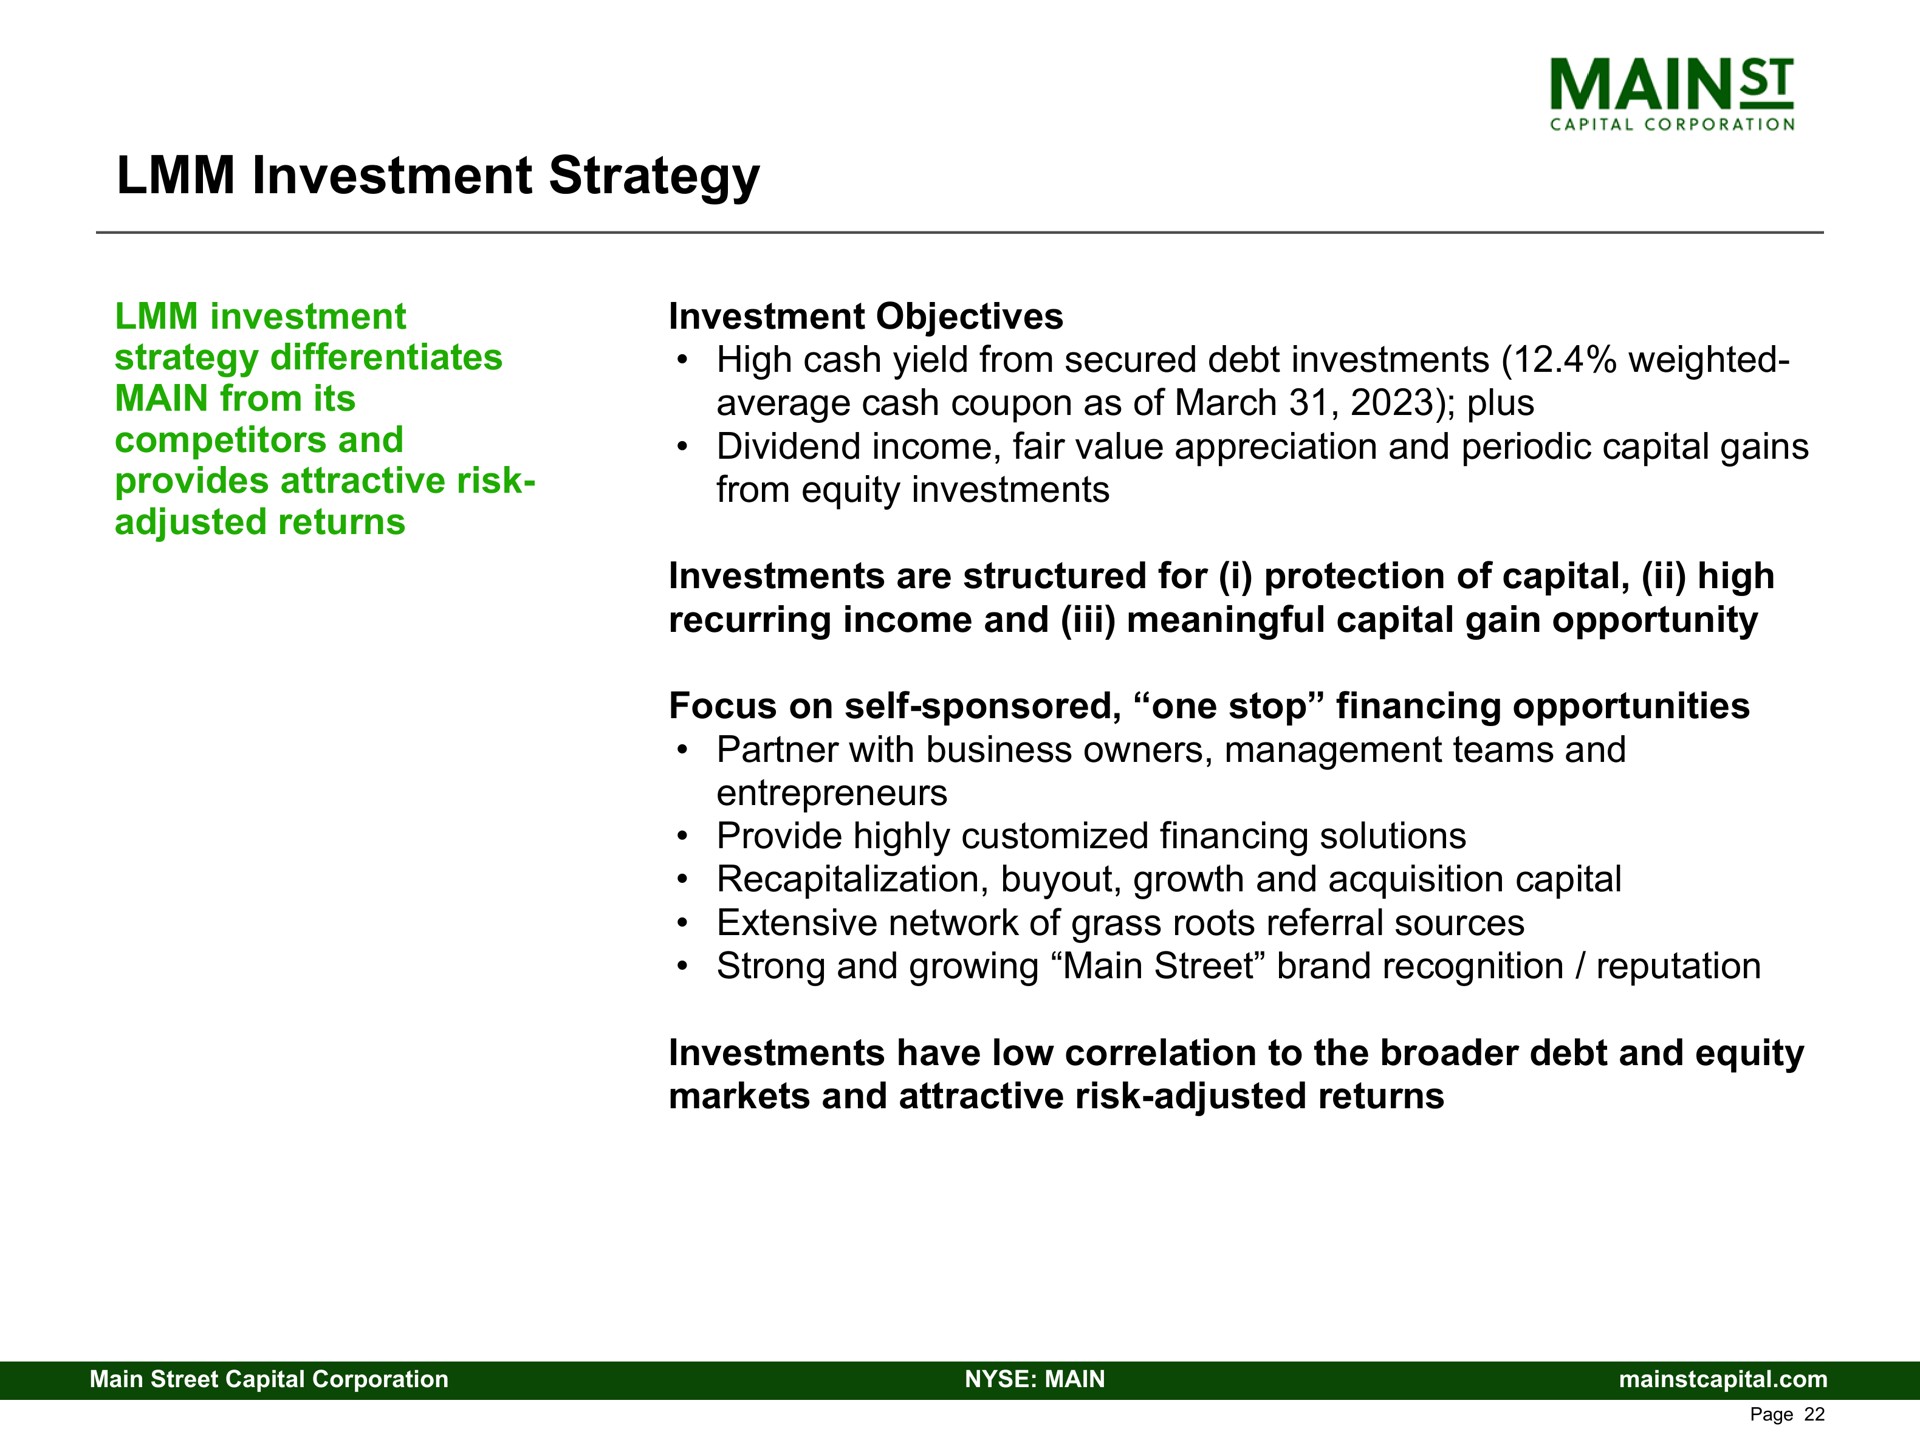 investment strategy investment strategy differentiates main from its competitors and provides attractive risk adjusted returns investment objectives high cash yield from secured debt investments weighted average cash coupon as of march plus dividend income fair value appreciation and periodic capital gains from equity investments investments are structured for i protection of capital high recurring income and meaningful capital gain opportunity focus on self sponsored one stop financing opportunities partner with business owners management teams and entrepreneurs provide highly financing solutions recapitalization growth and acquisition capital extensive network of grass roots referral sources strong and growing main street brand recognition reputation investments have low correlation to the debt and equity markets and attractive risk adjusted returns | Main Street Capital